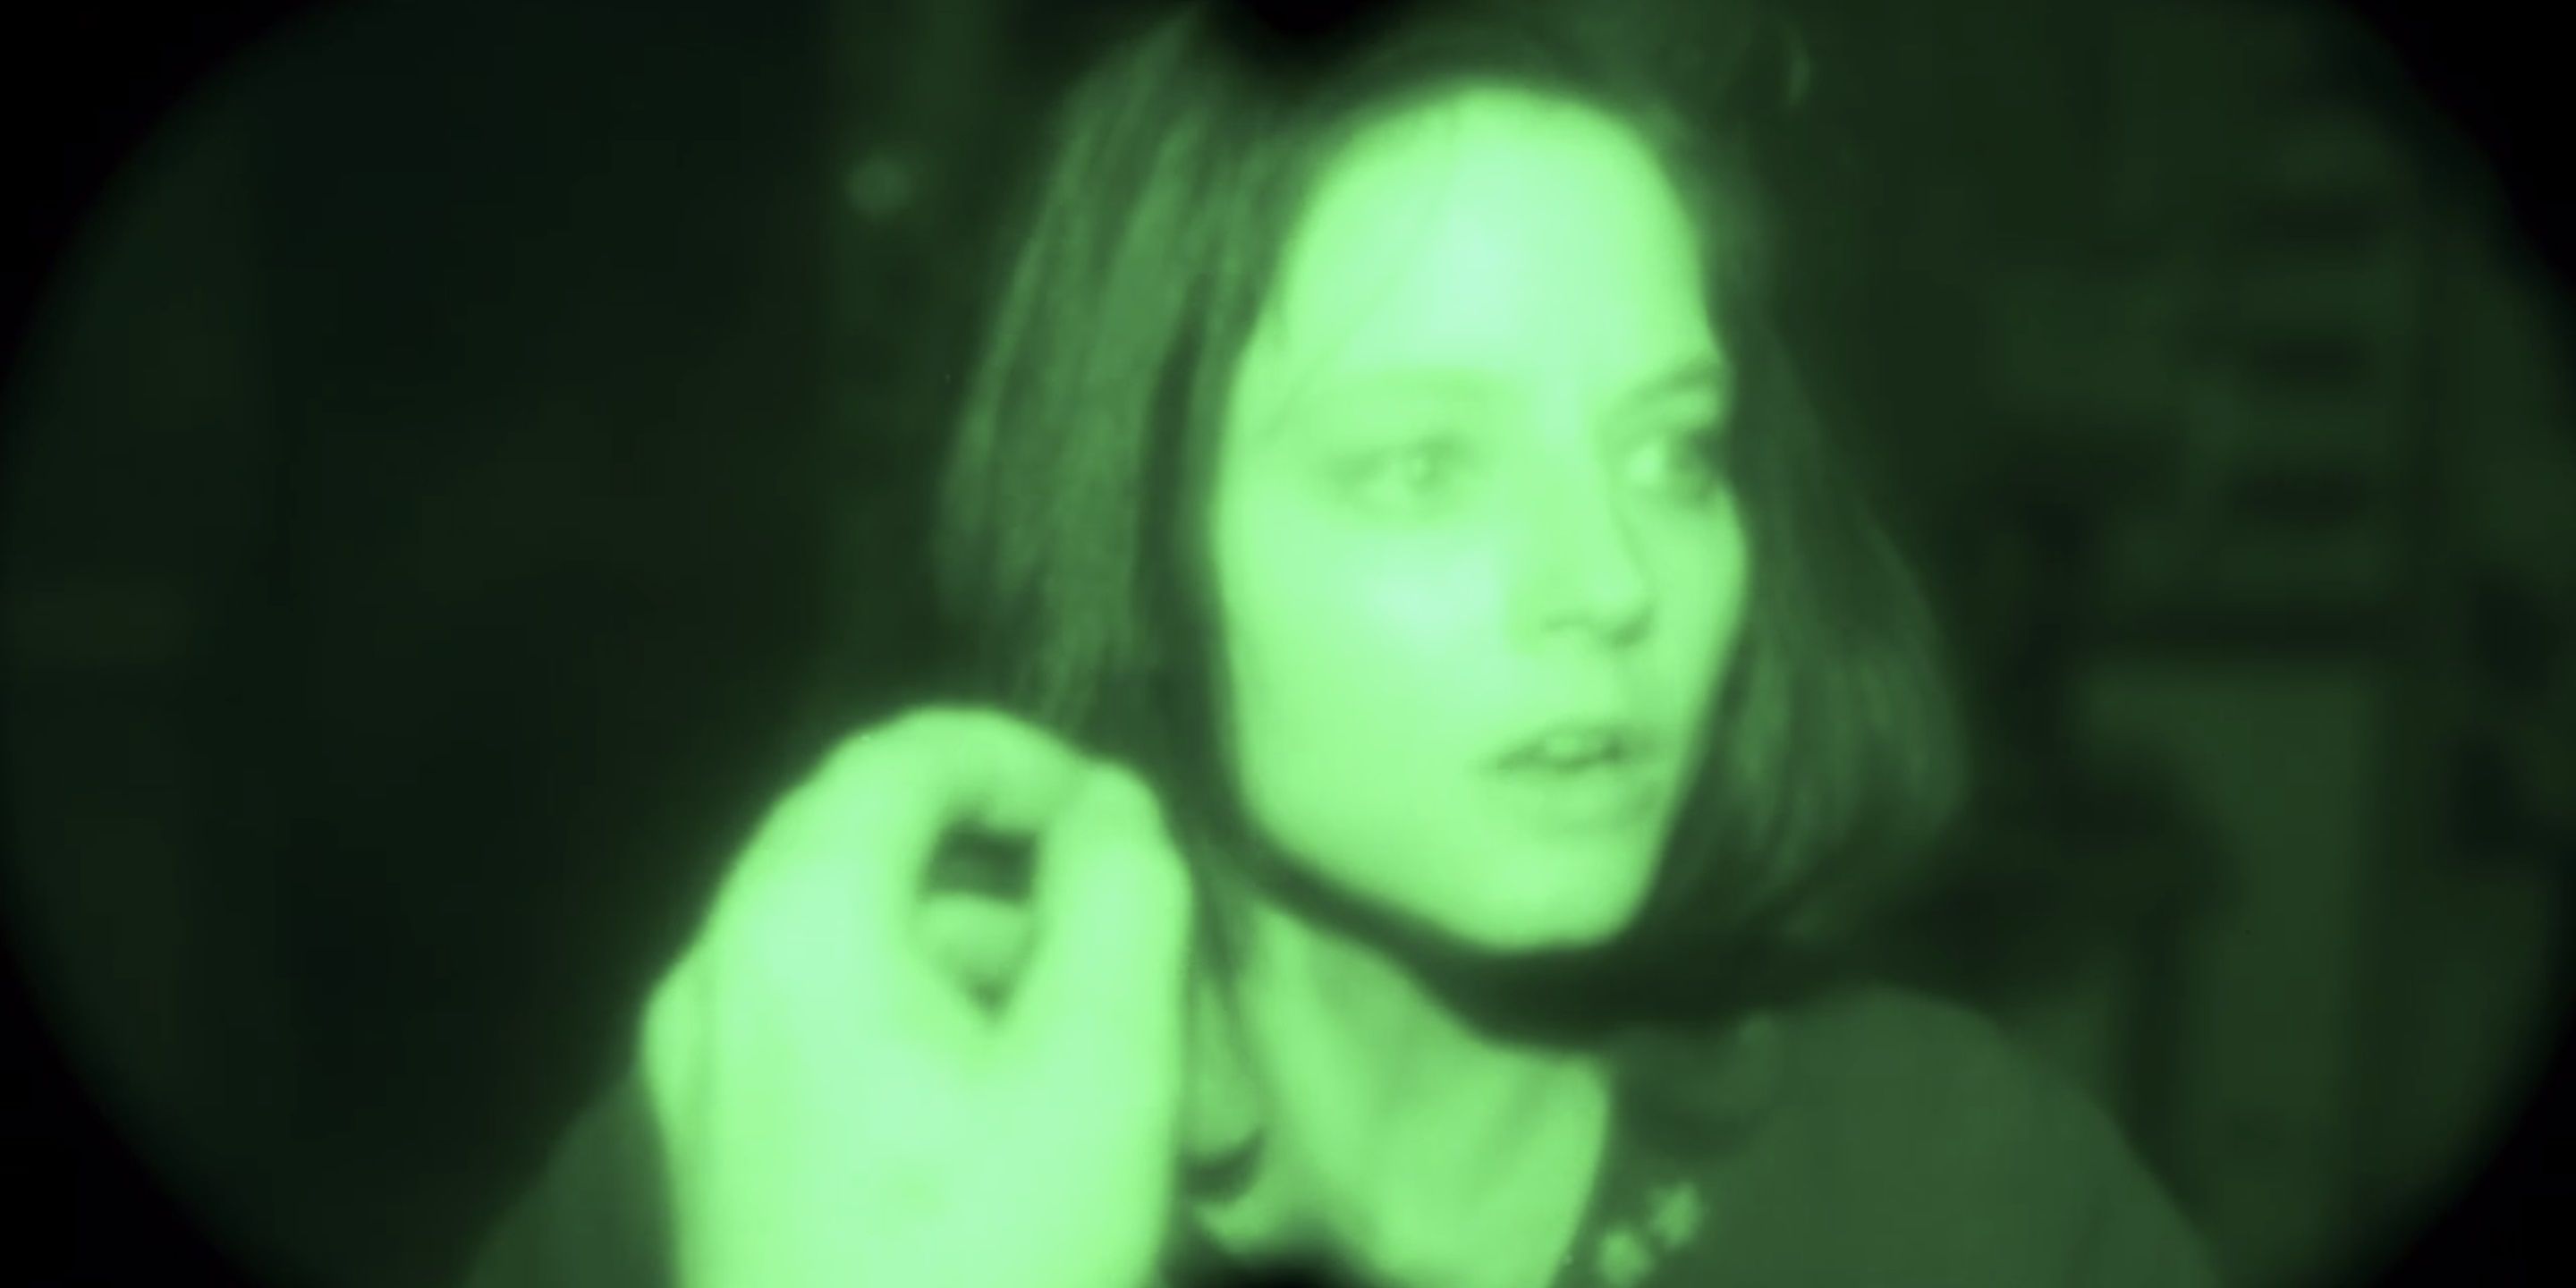 Clarice Starling in night vision in The Silence of the Lambs